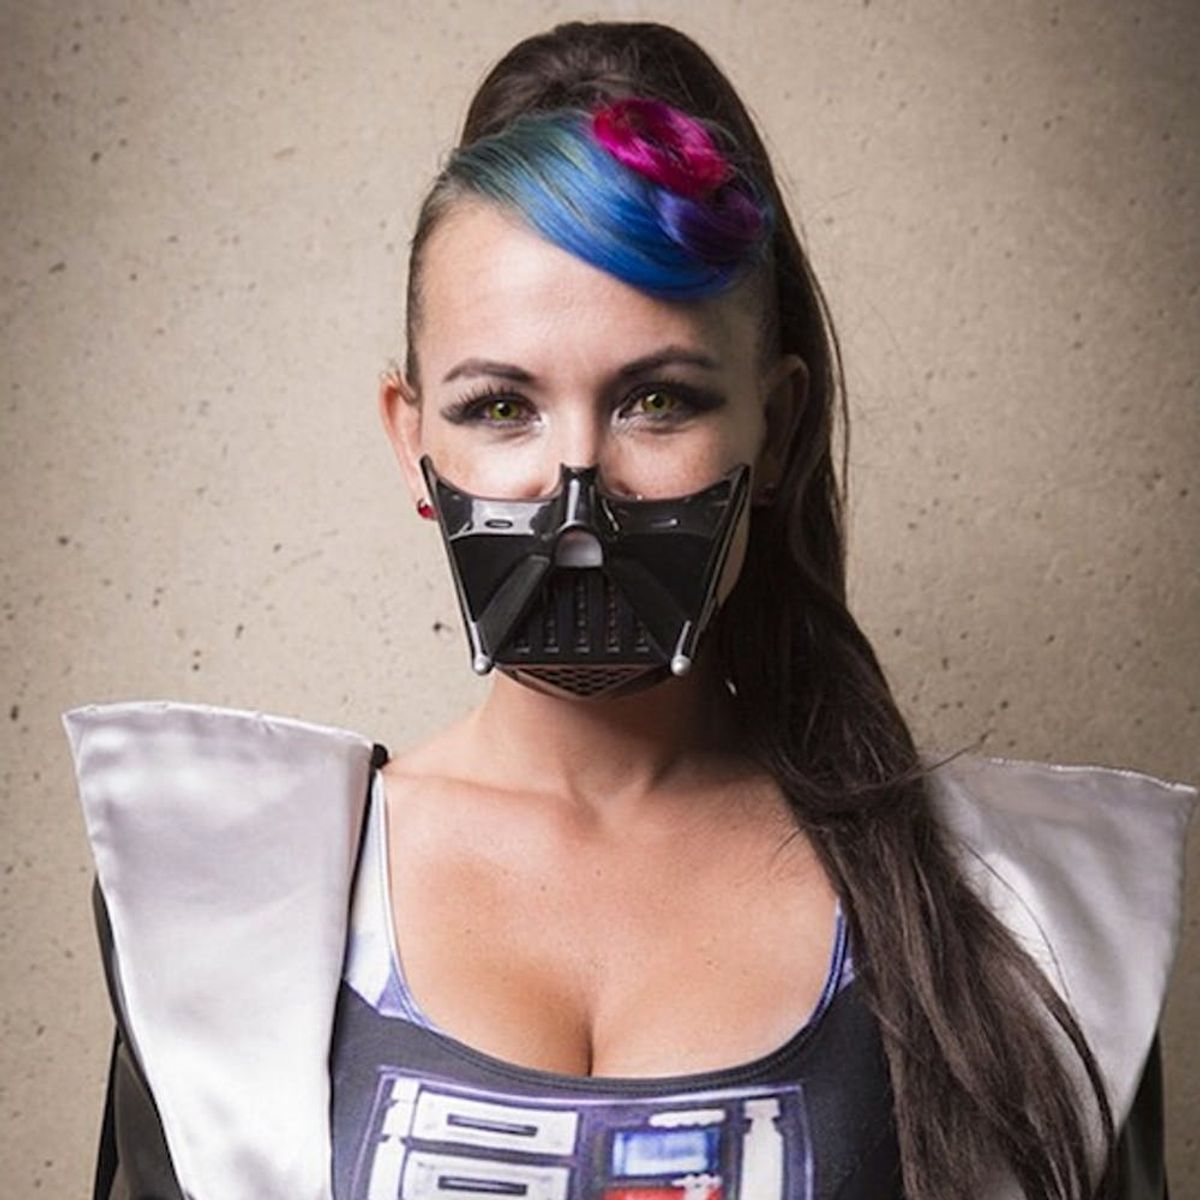 20 of the Best Comic-Con 2015 Costumes to Pin for Halloween Inspo